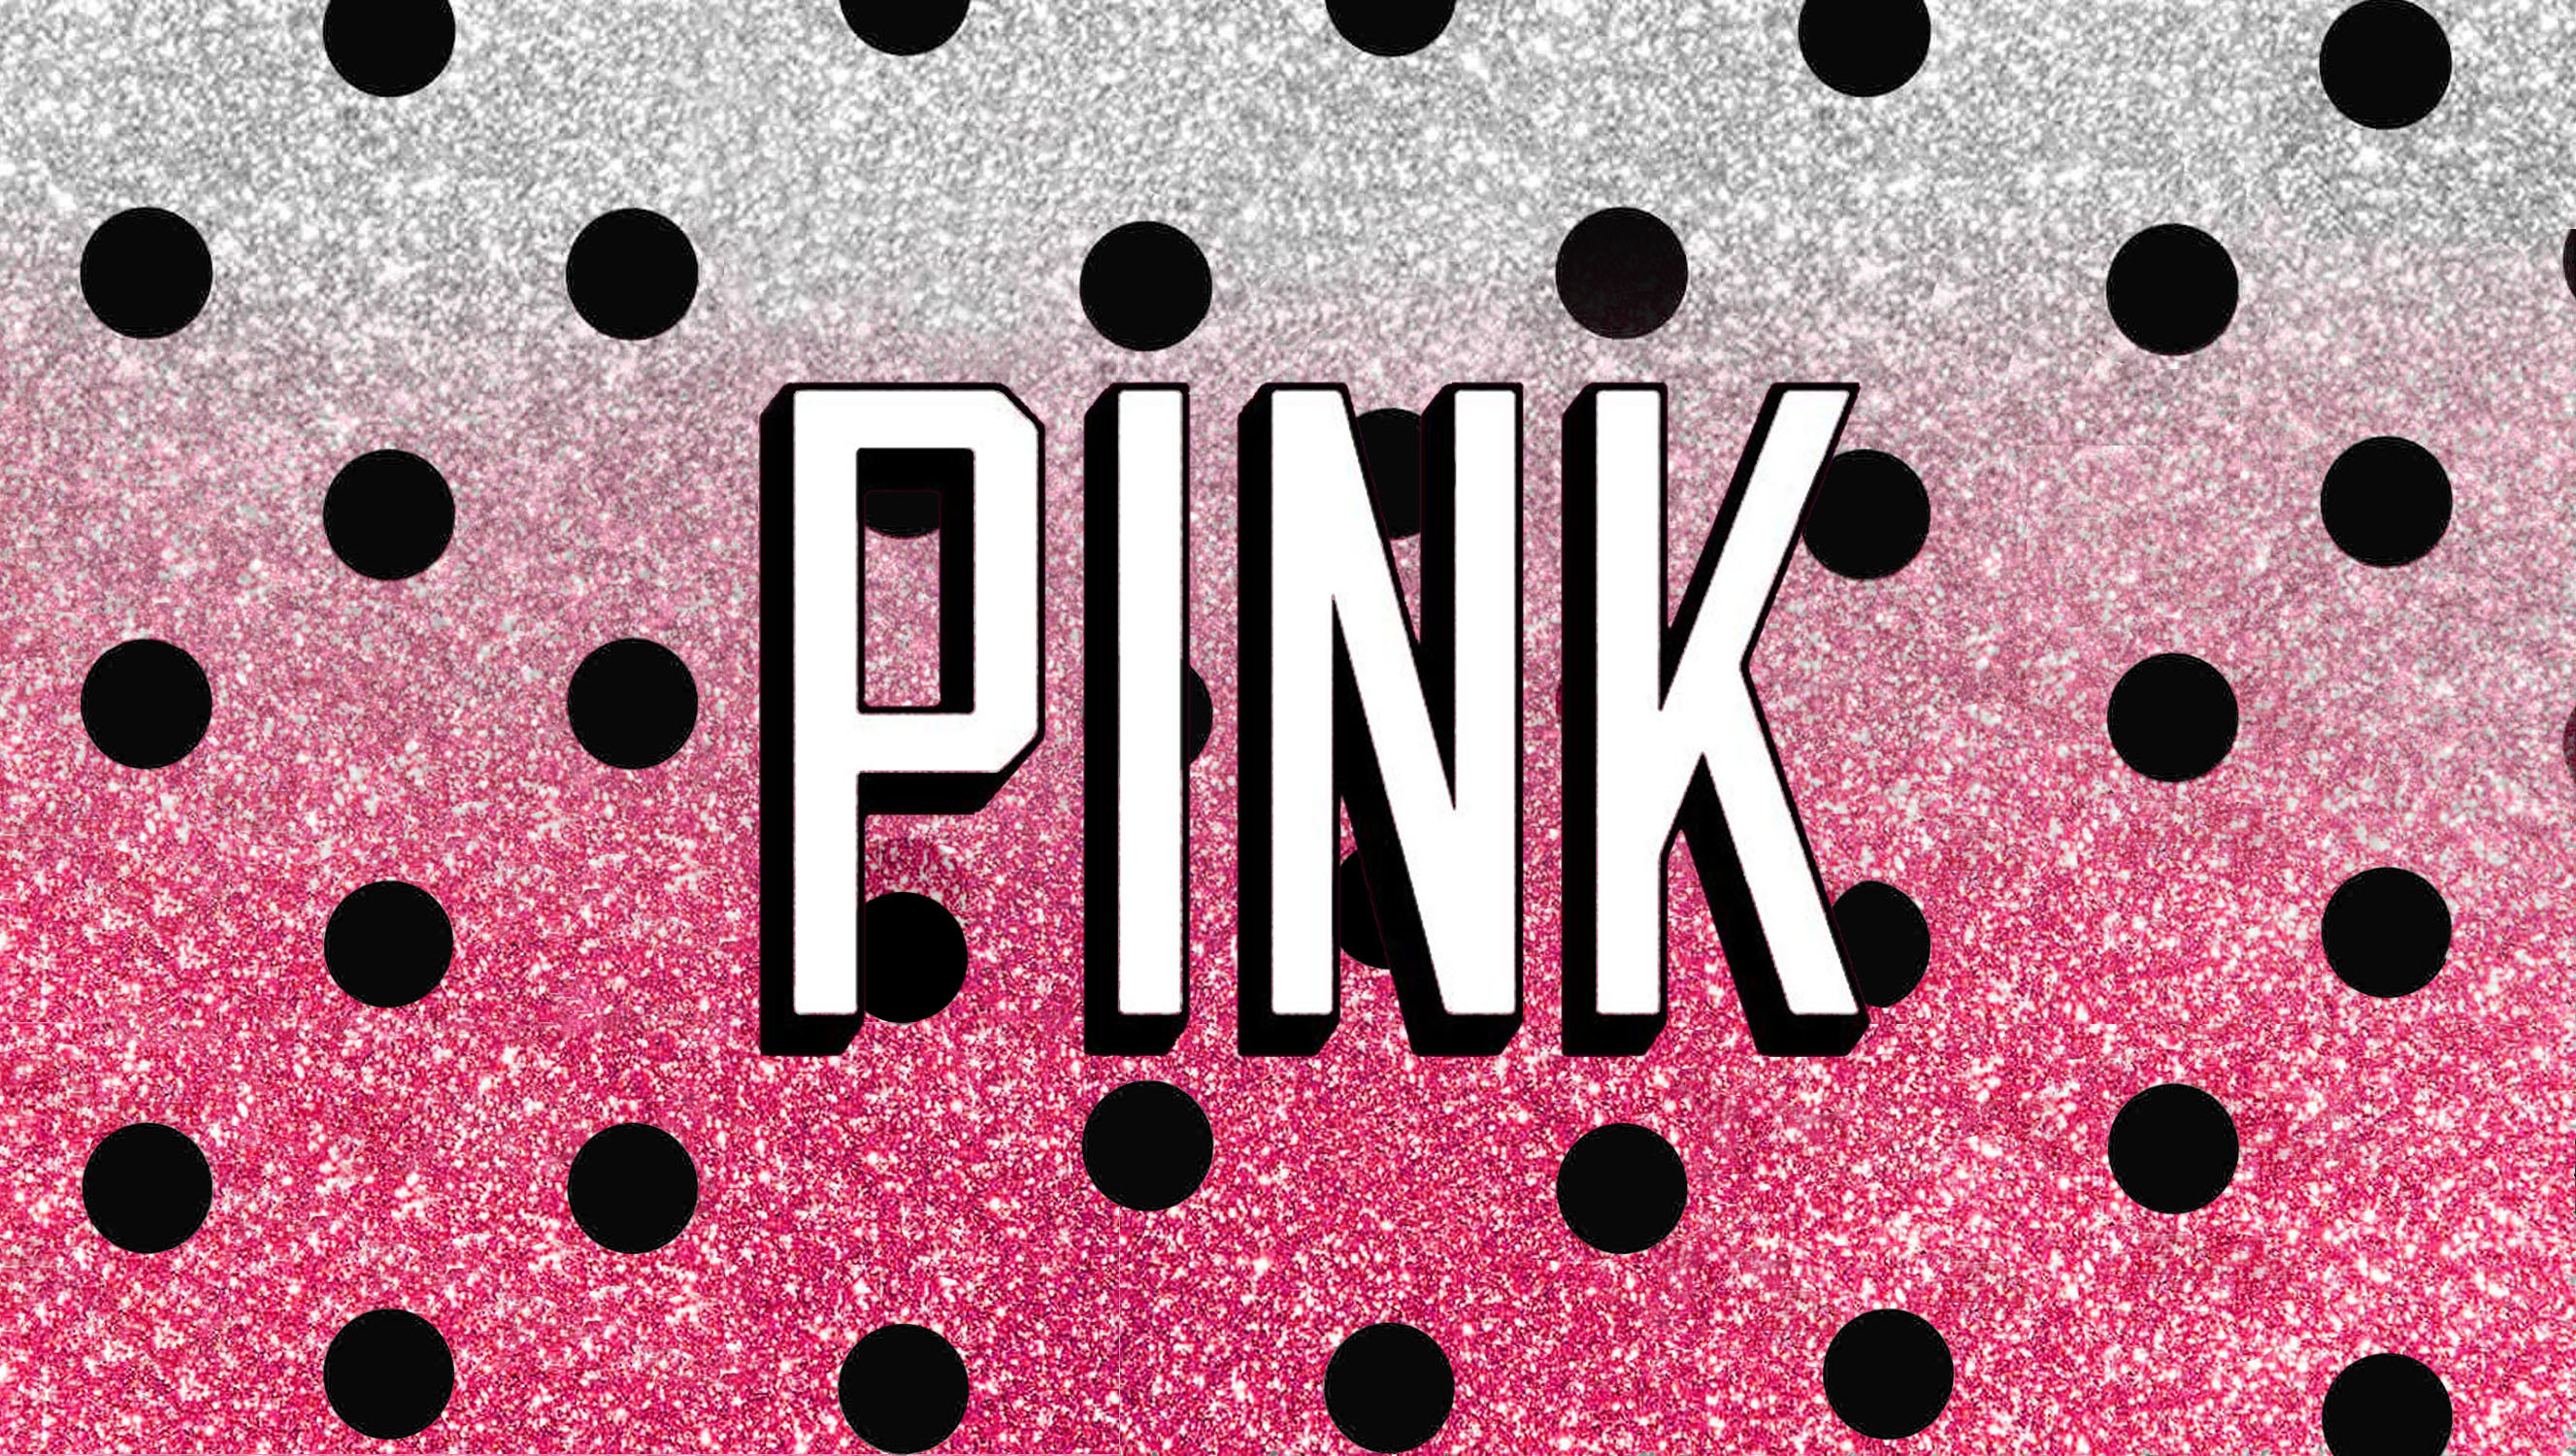 2654x1500 Love pink vs wallpapers high resolution.